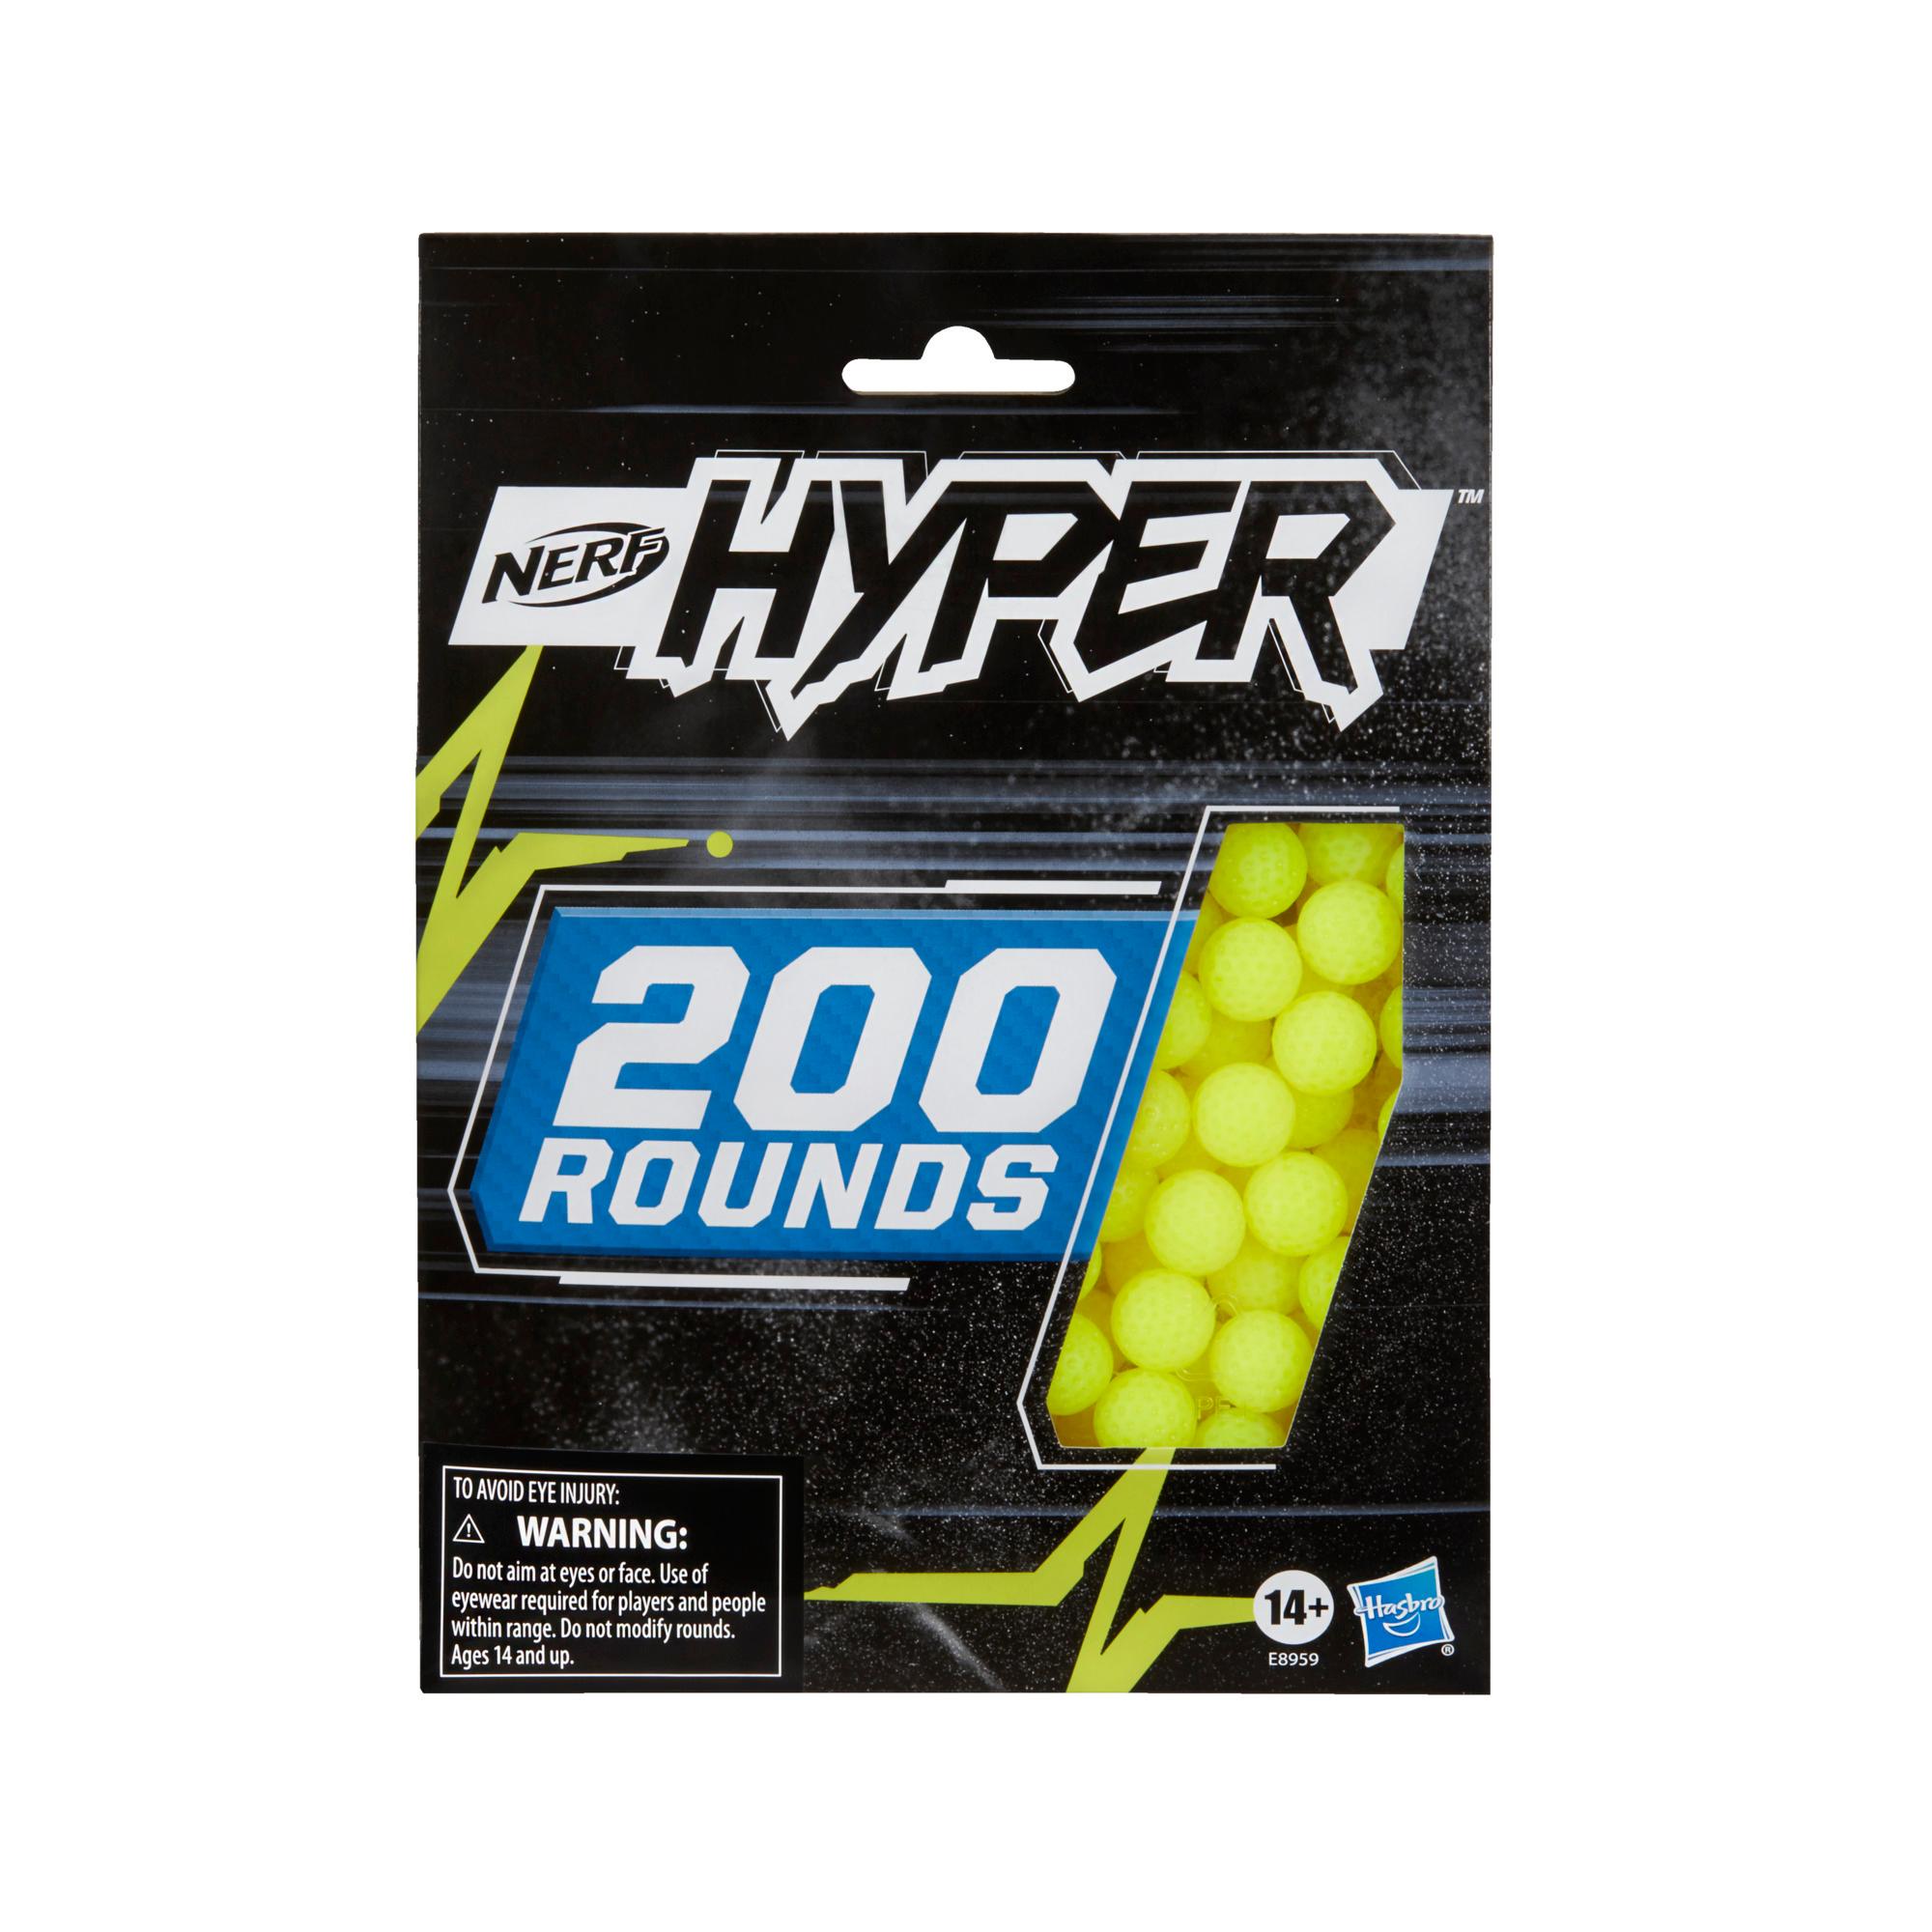 Nerf Hyper 200-Round Refill -- Includes Pack of 200 Official Nerf Hyper Rounds -- For Use with Nerf Hyper Blasters